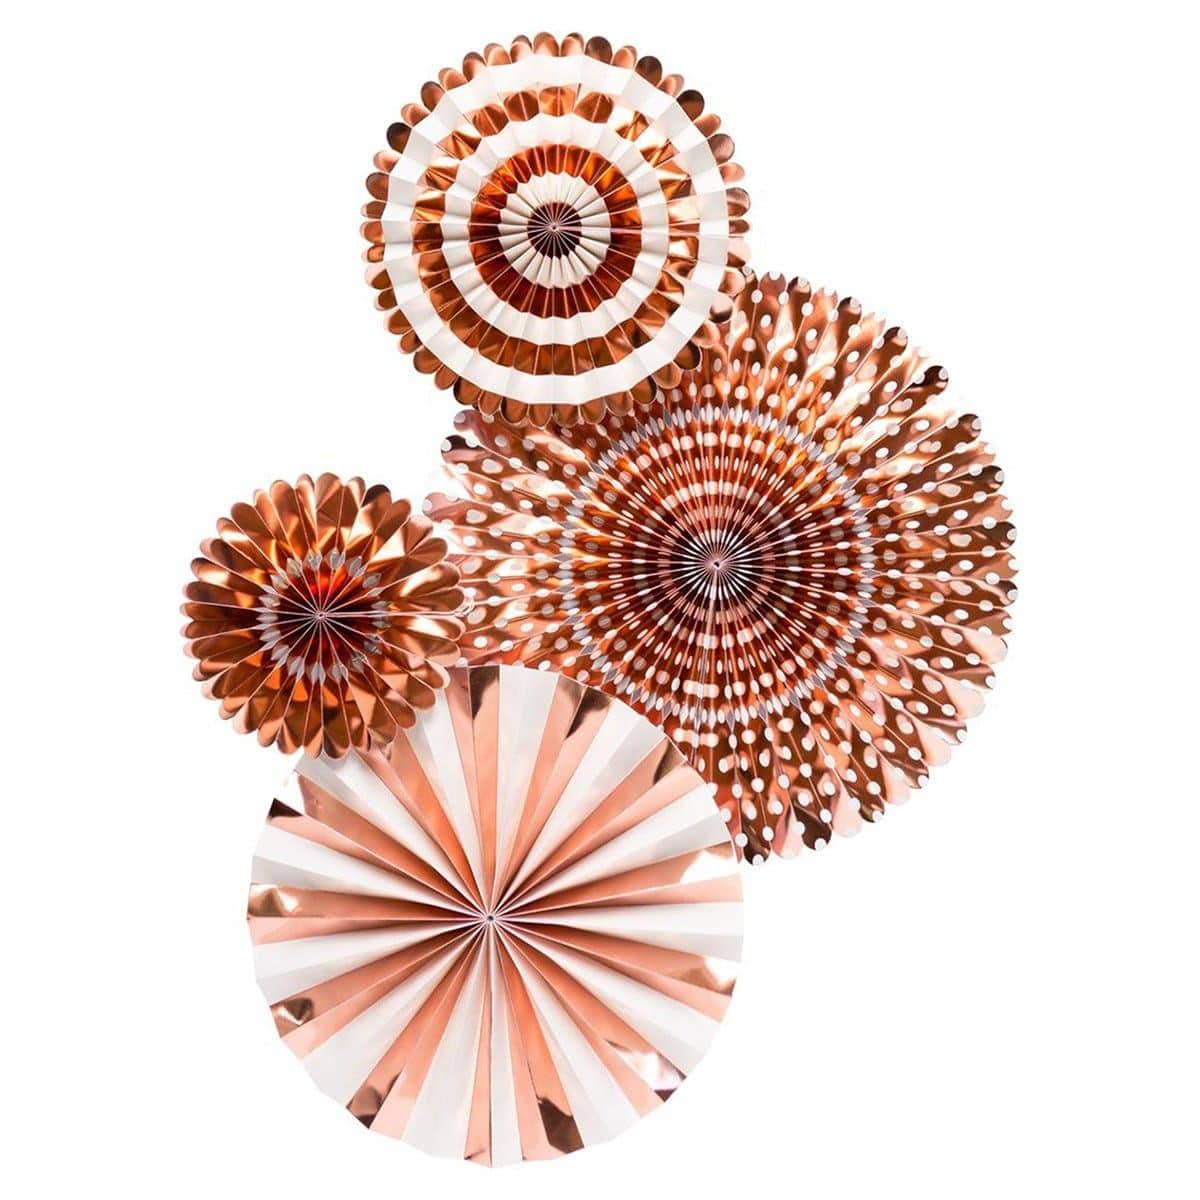 Buy Decorations Rose Gold - Party Fans 4/pkg sold at Party Expert